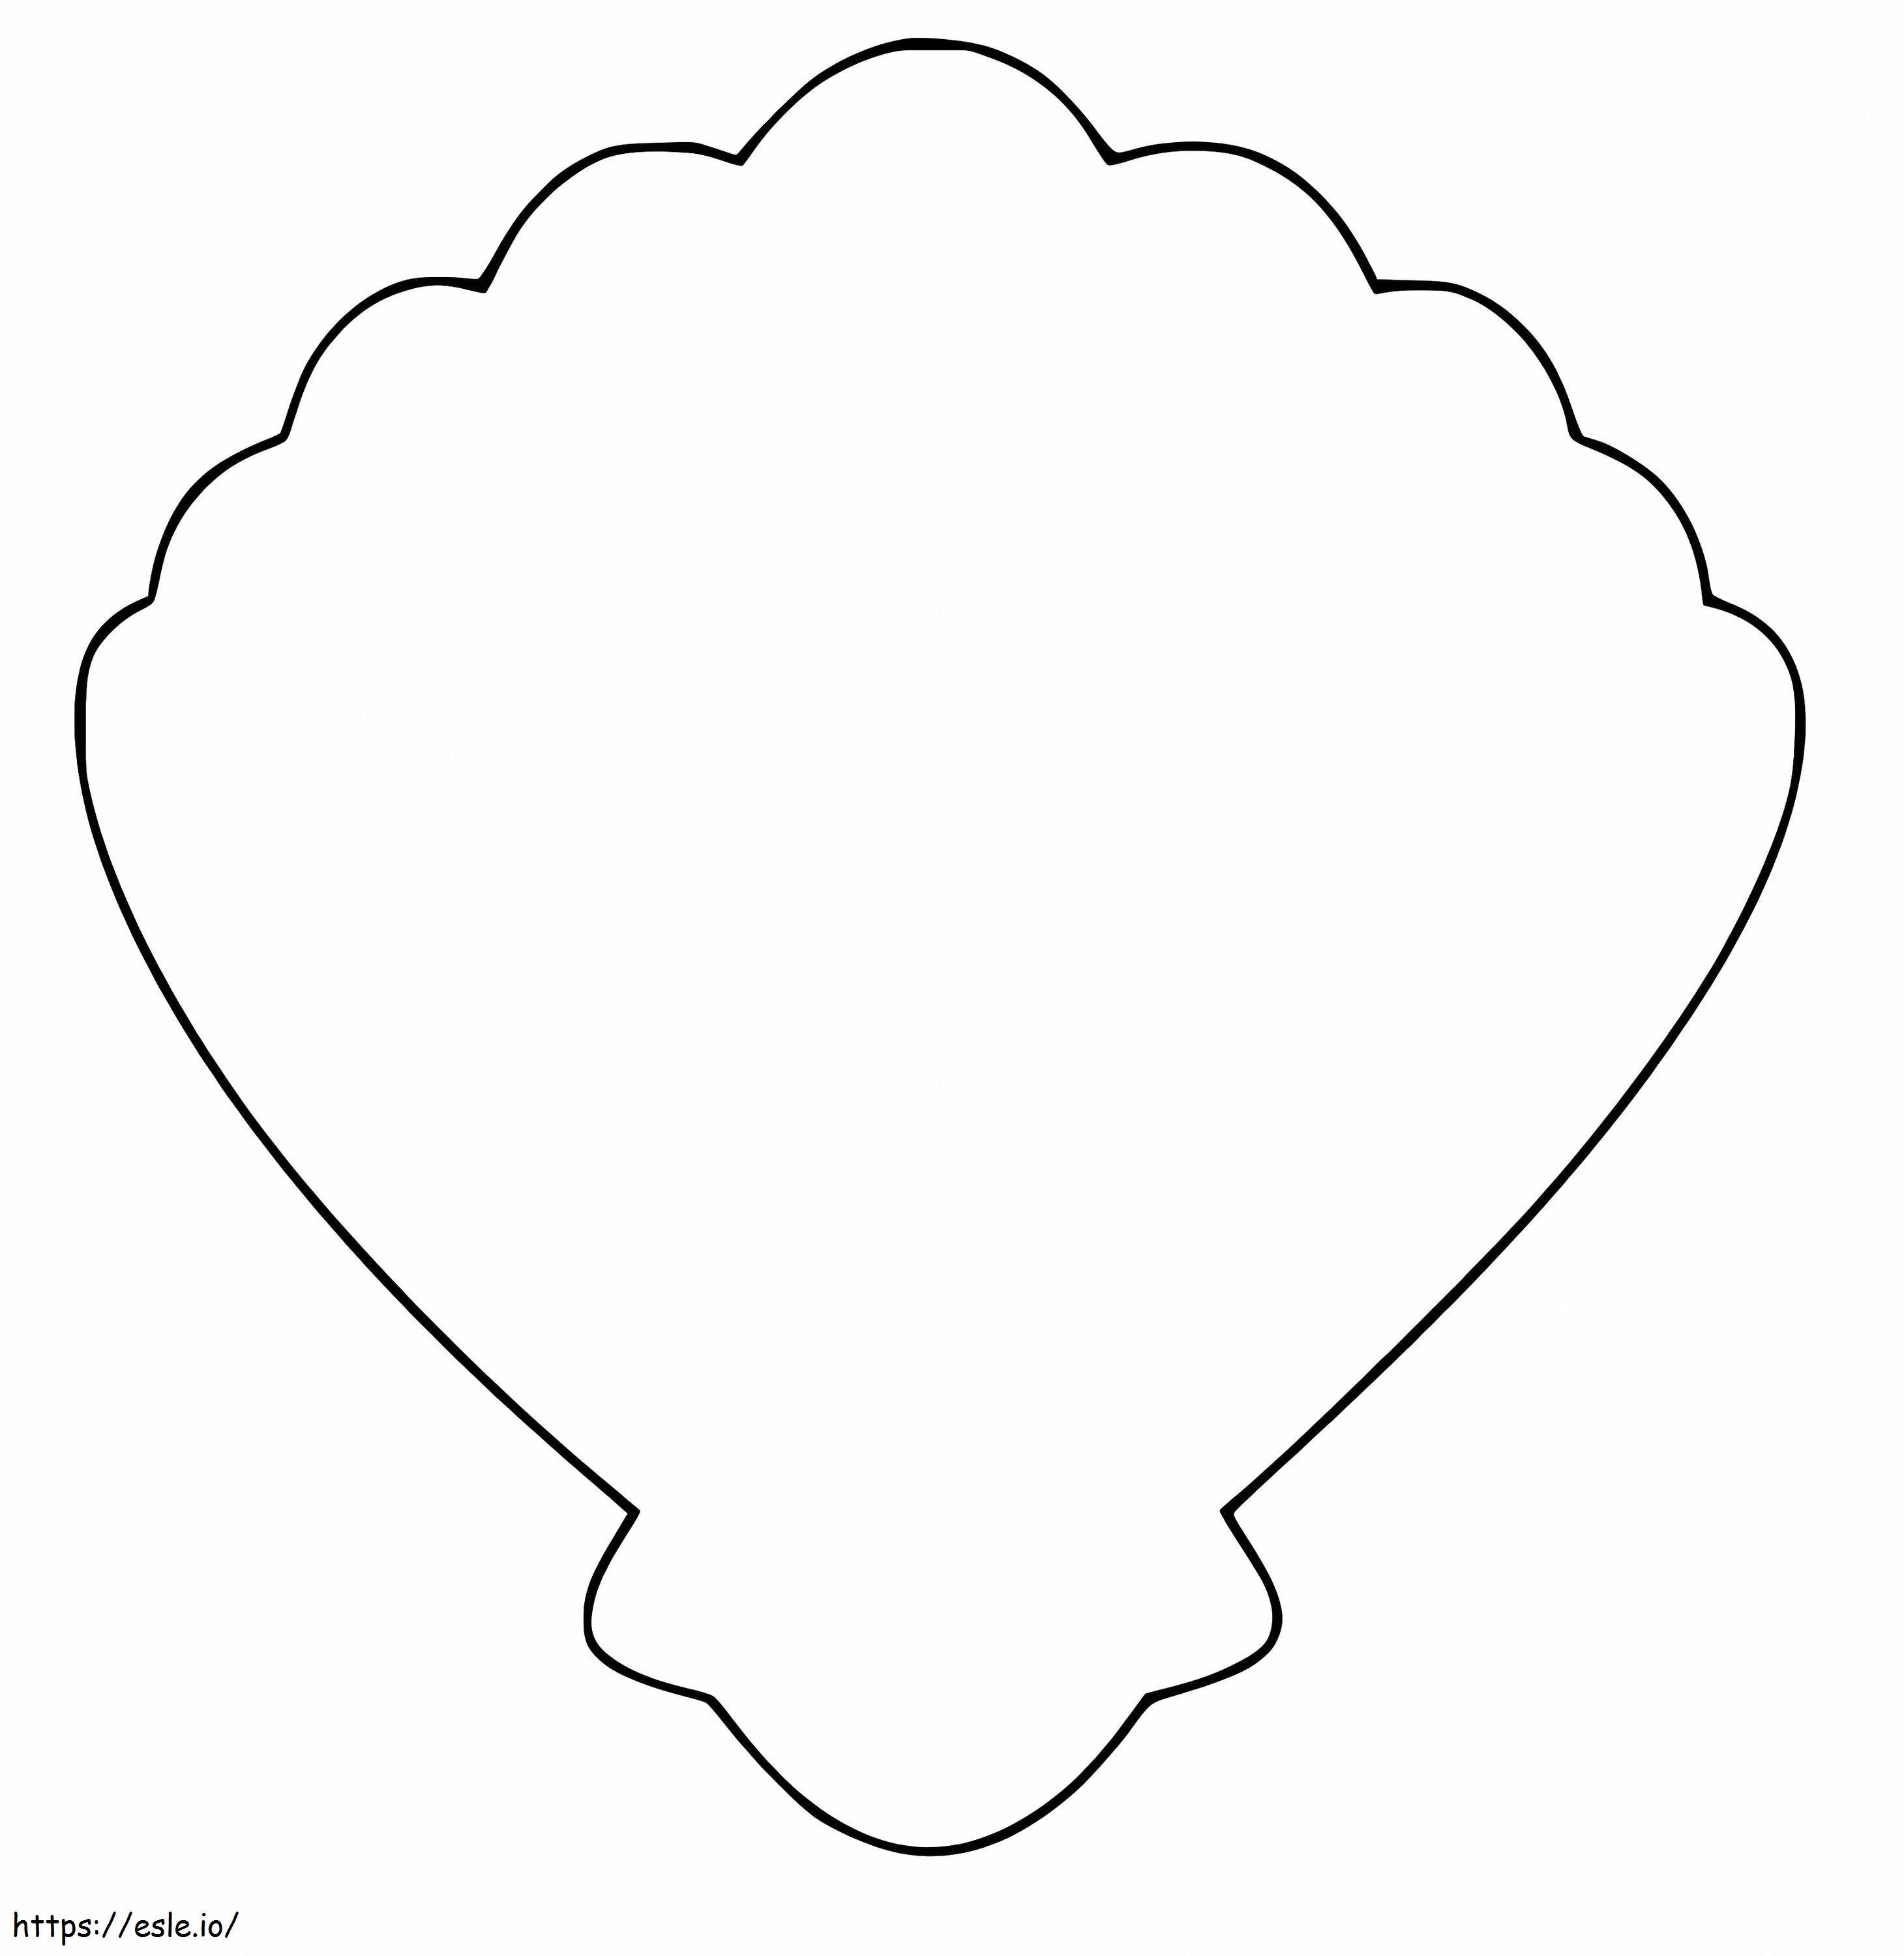 Scallop Outline coloring page